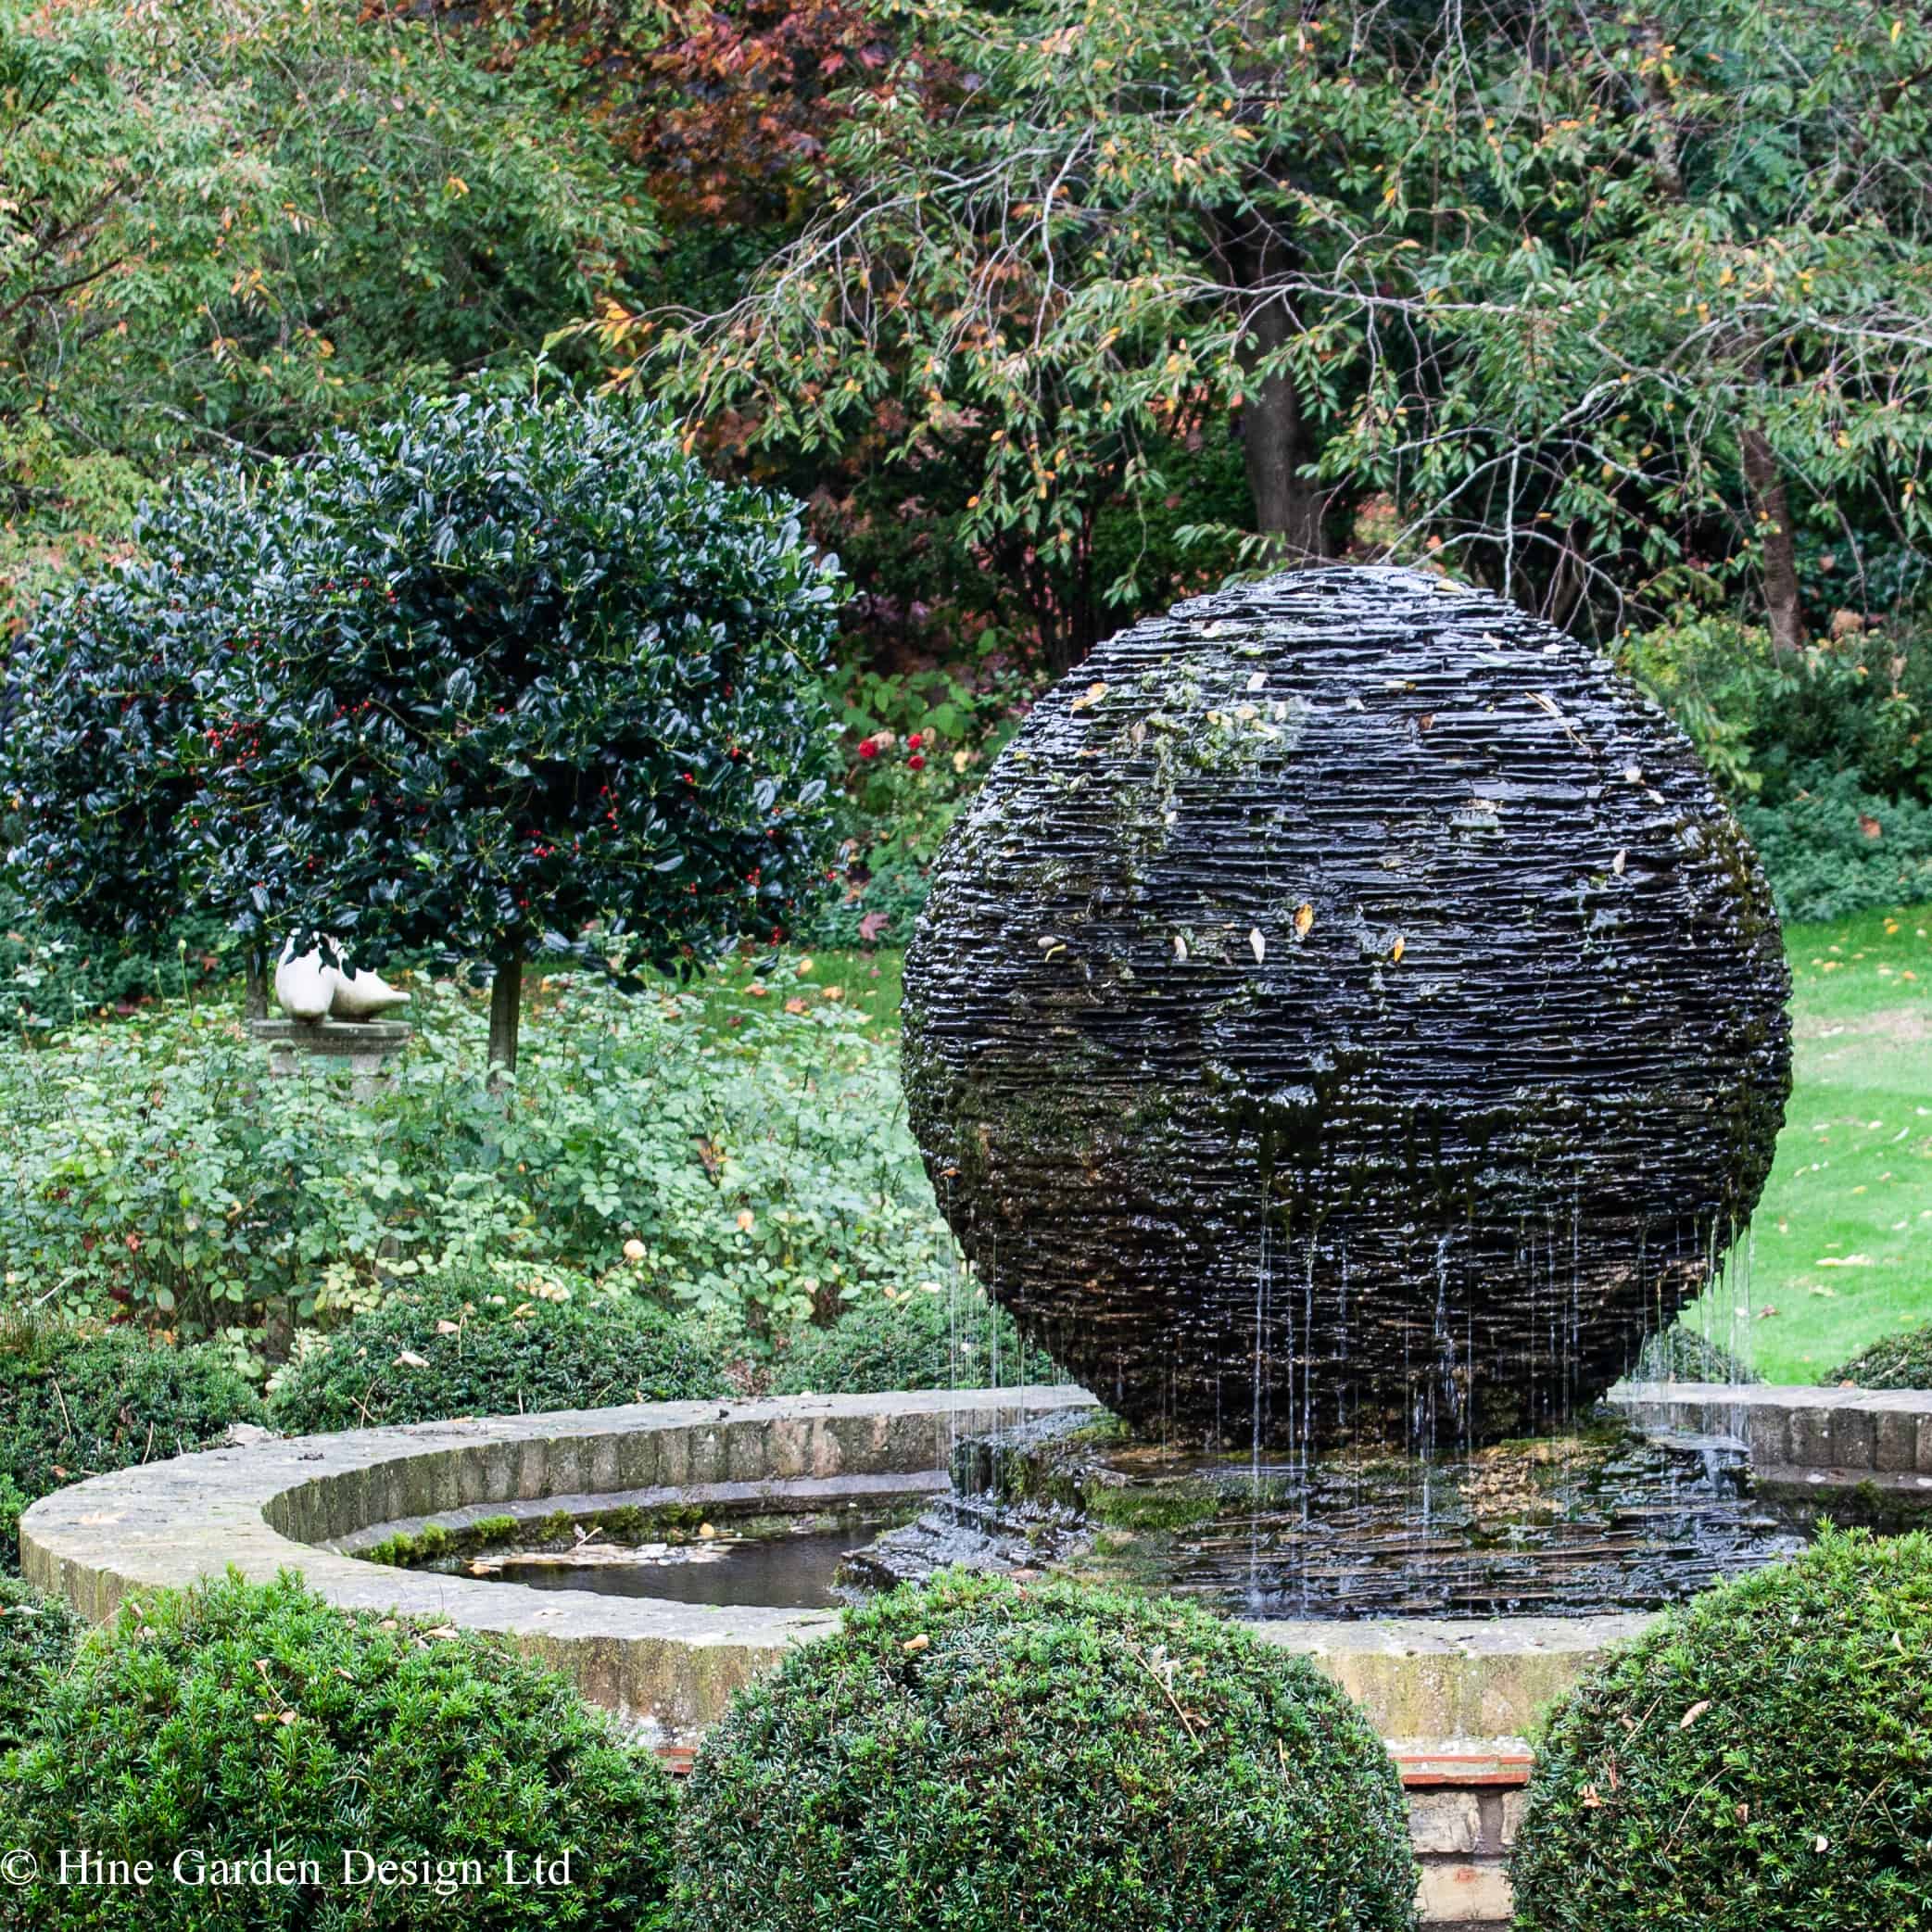 spherical dark grey stone water feature made of layered slate in a garden surrounded by topiary in a pool